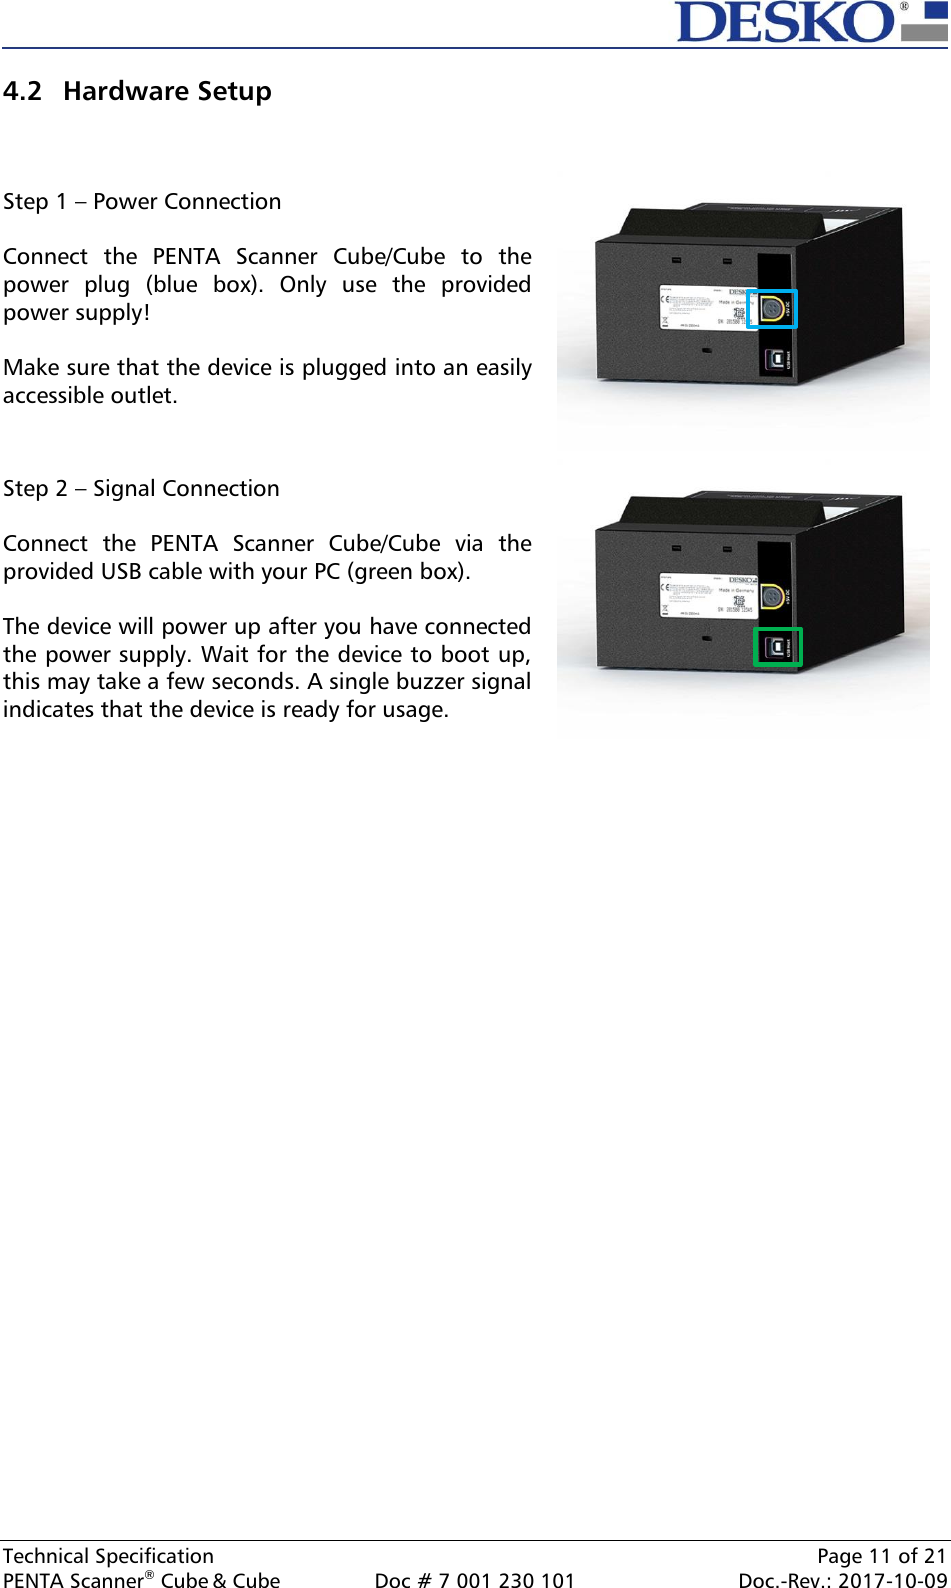  Technical Specification    Page 11 of 21 PENTA Scanner® Cube &amp; Cube  Doc # 7 001 230 101  Doc.-Rev.: 2017-10-09    4.2 Hardware Setup   Step 1 – Power Connection  Connect  the  PENTA  Scanner  Cube/Cube  to  the power  plug  (blue  box).  Only  use  the  provided power supply!   Make sure that the device is plugged into an easily accessible outlet.   Step 2 – Signal Connection  Connect  the  PENTA  Scanner  Cube/Cube  via  the provided USB cable with your PC (green box).  The device will power up after you have connected the power supply. Wait for the device to boot up, this may take a few seconds. A single buzzer signal indicates that the device is ready for usage.      